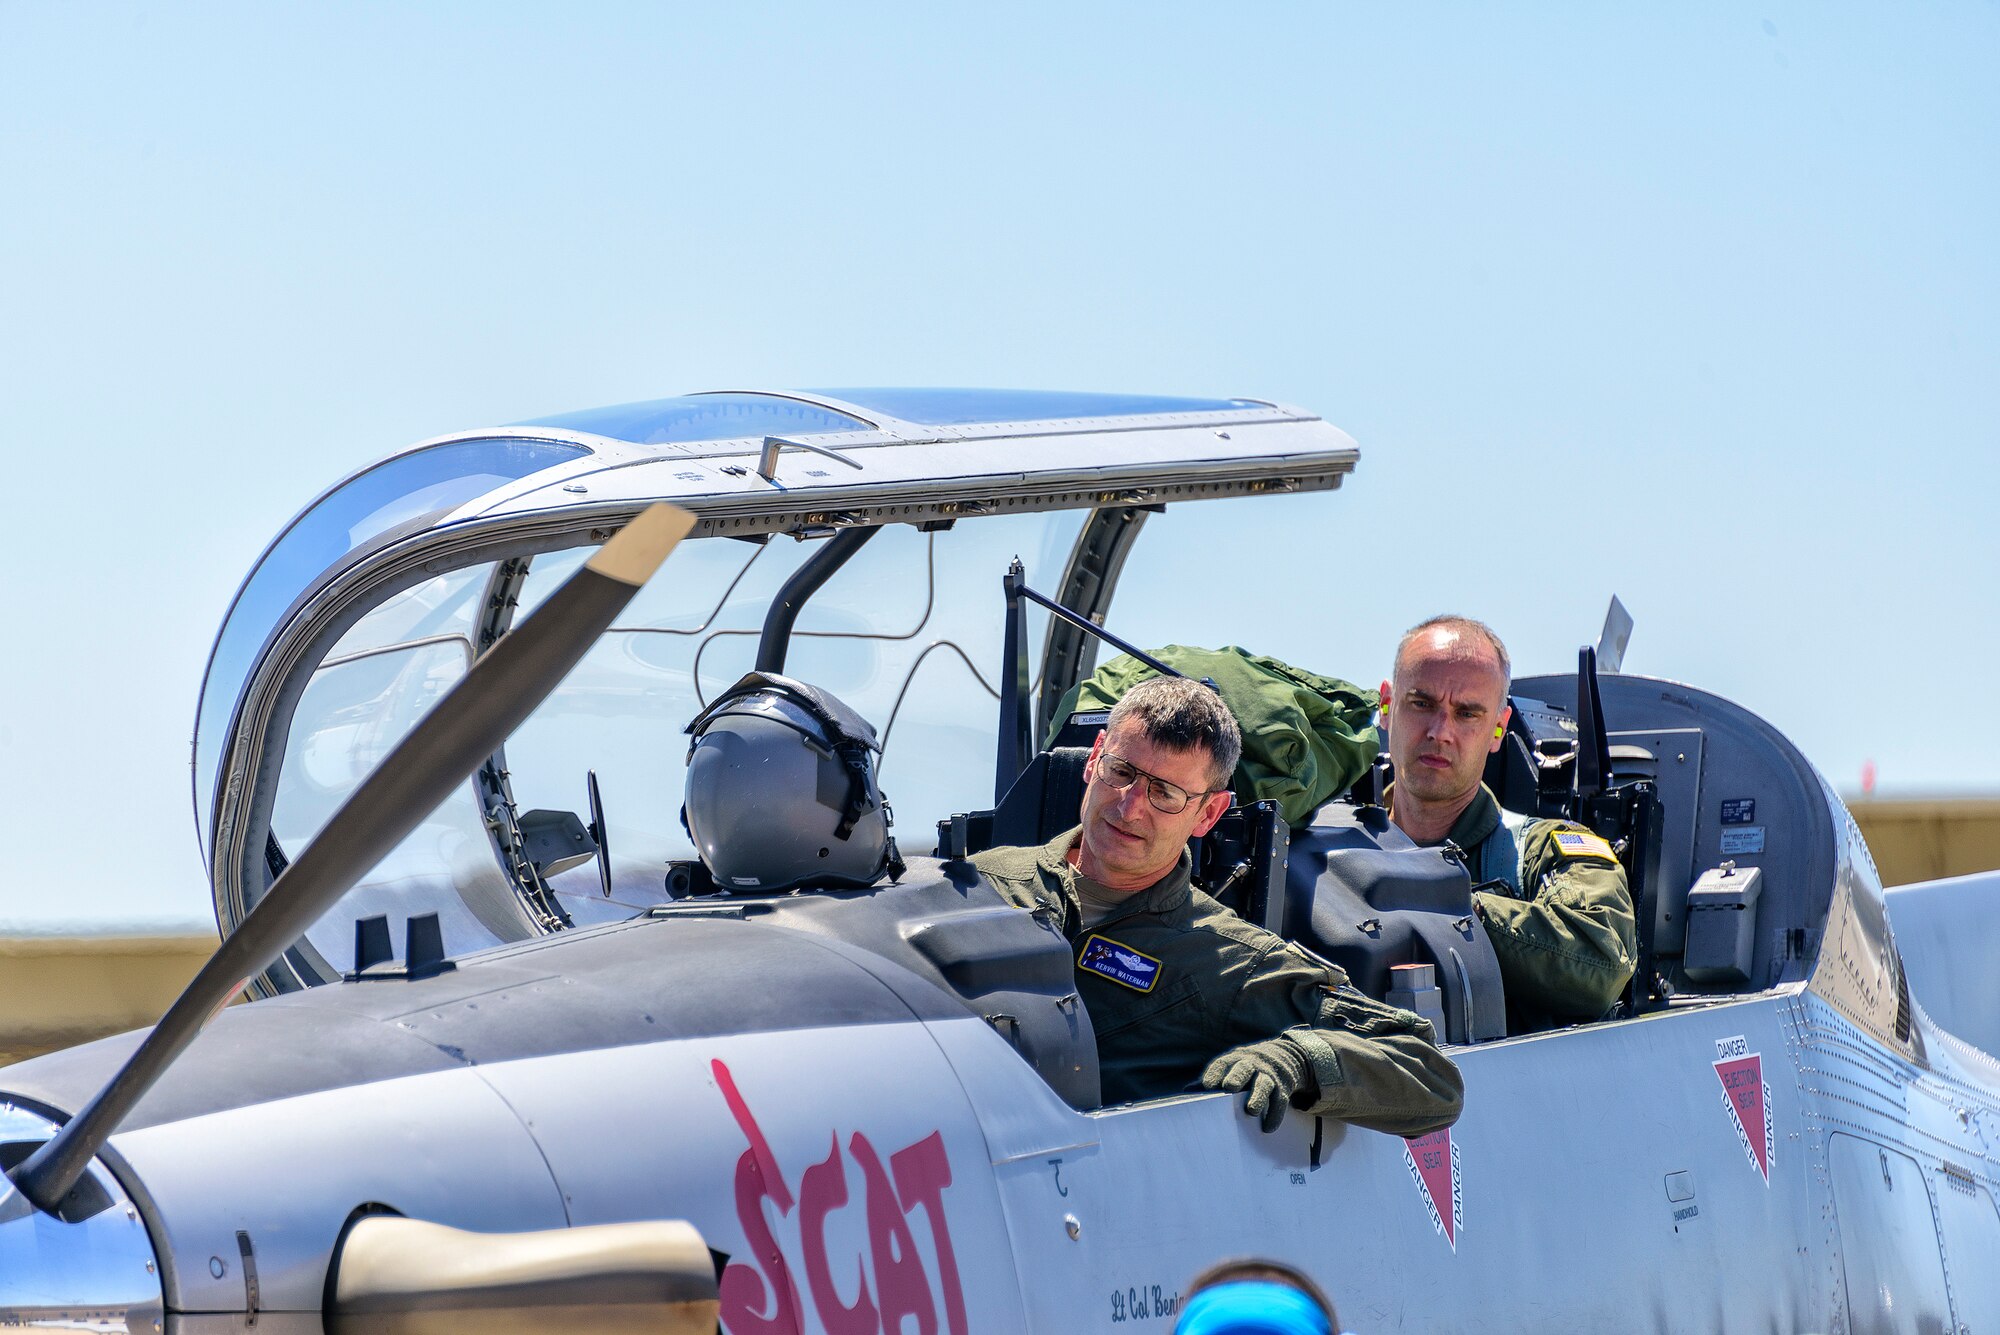 Instructor pilot retires after 33 years of service.